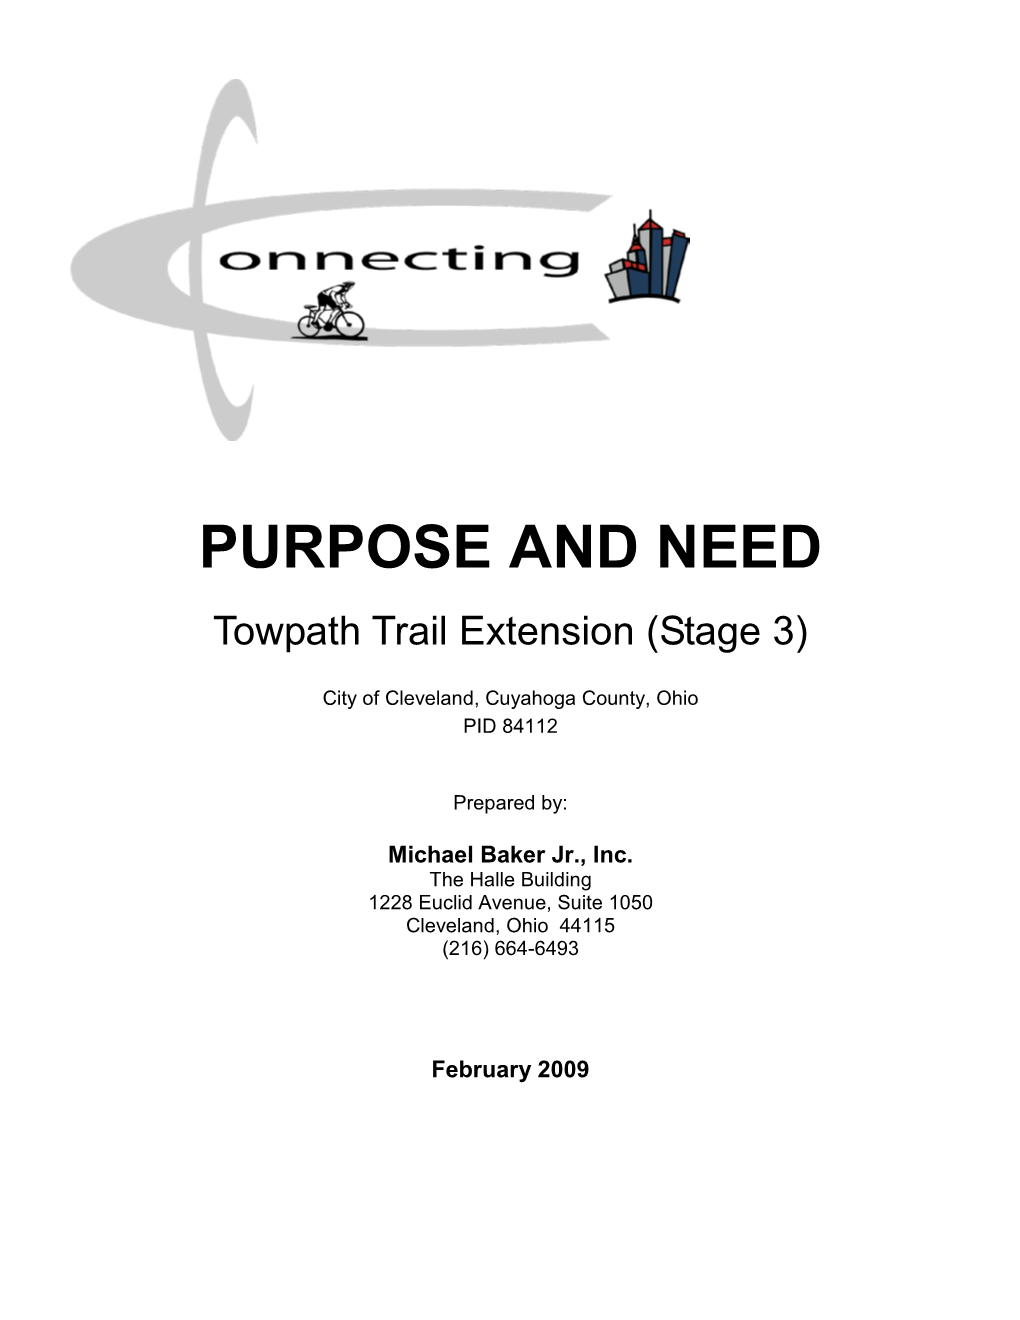 Towpath Trail Stage 3, Purpose and Need